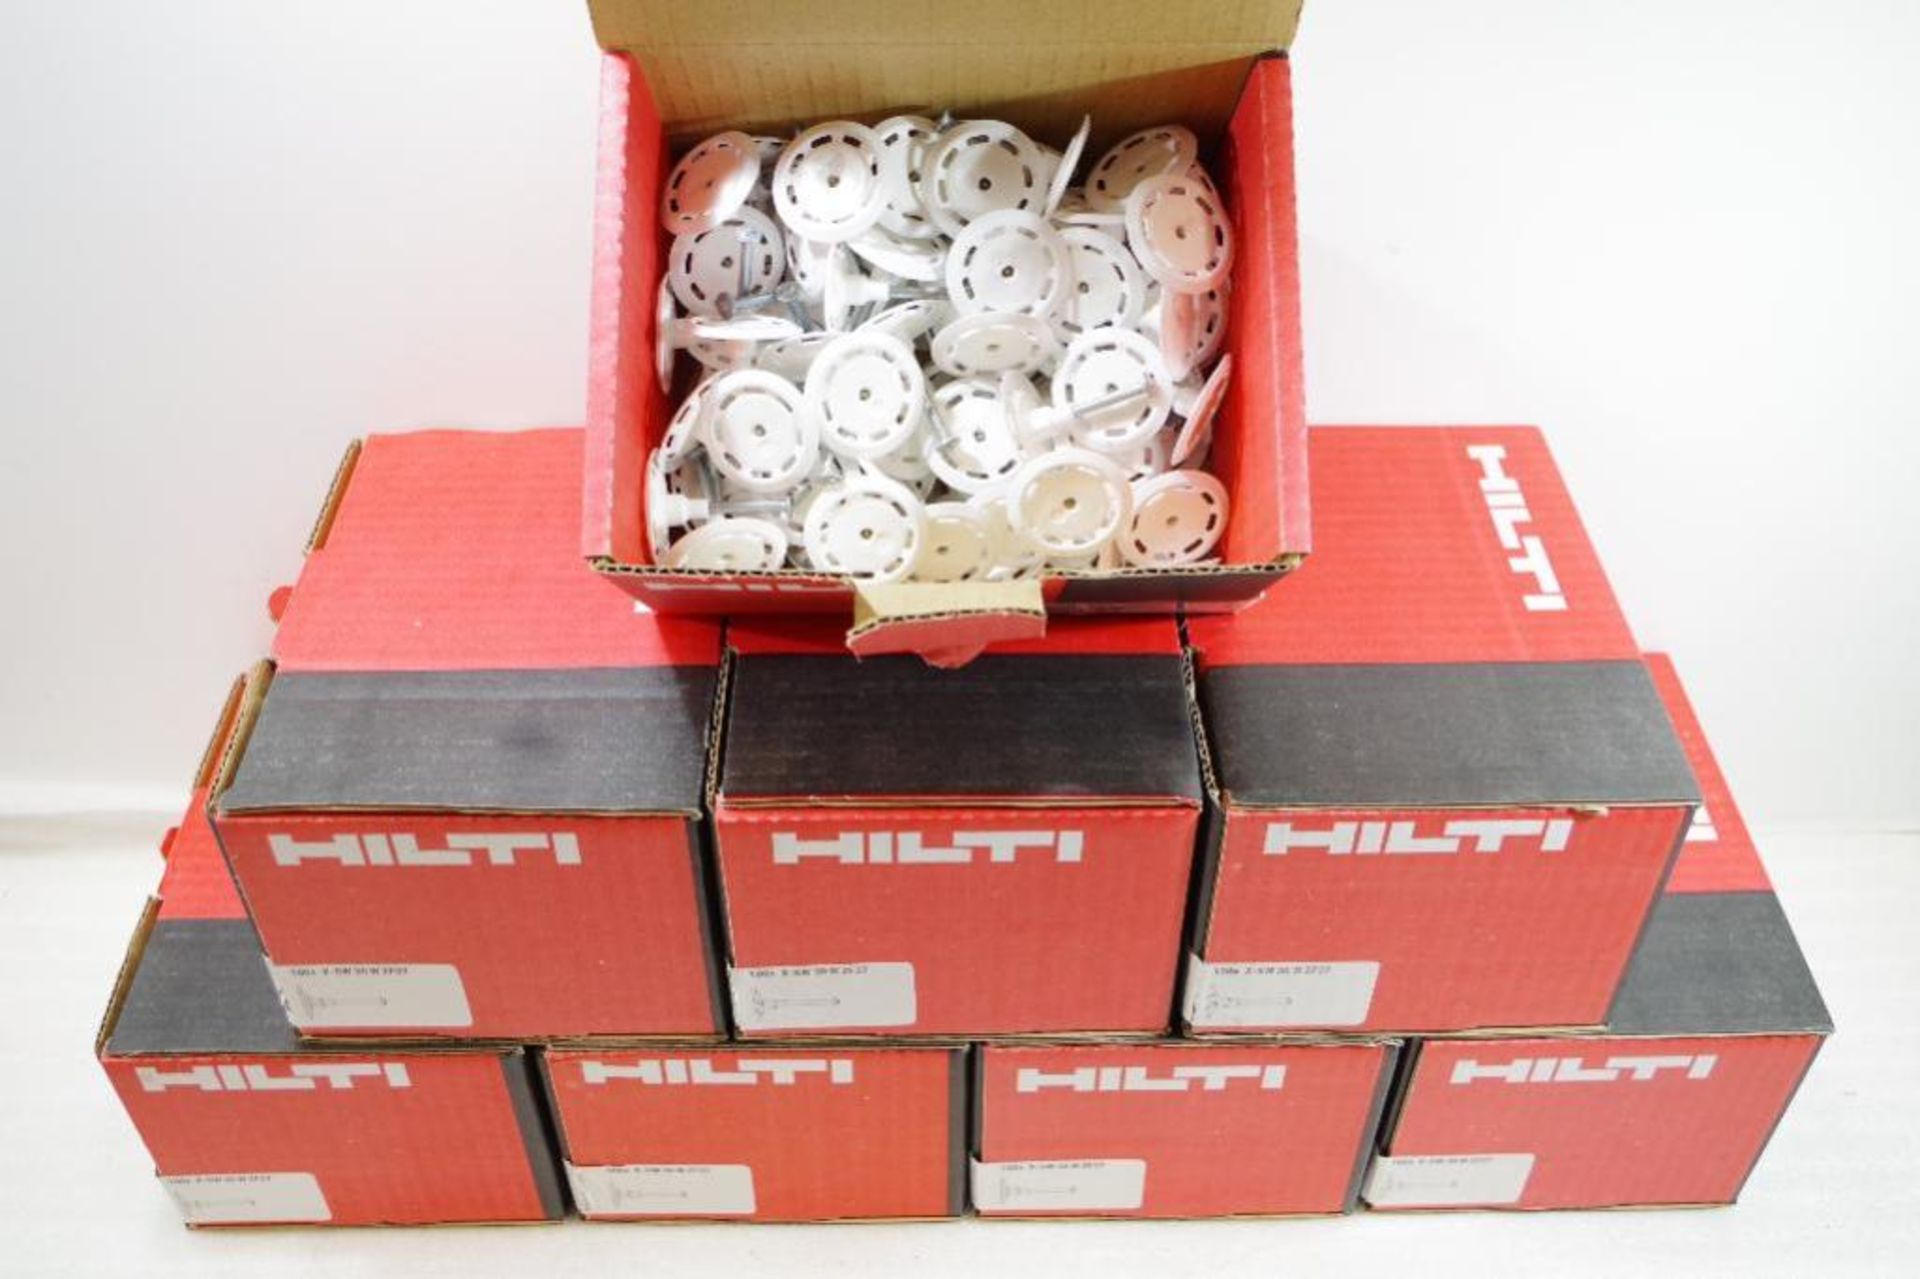 [800] HILTI Soft Washer Fasteners X-SW 30 ZF37, M/N 387675 (8 Boxes of 100)